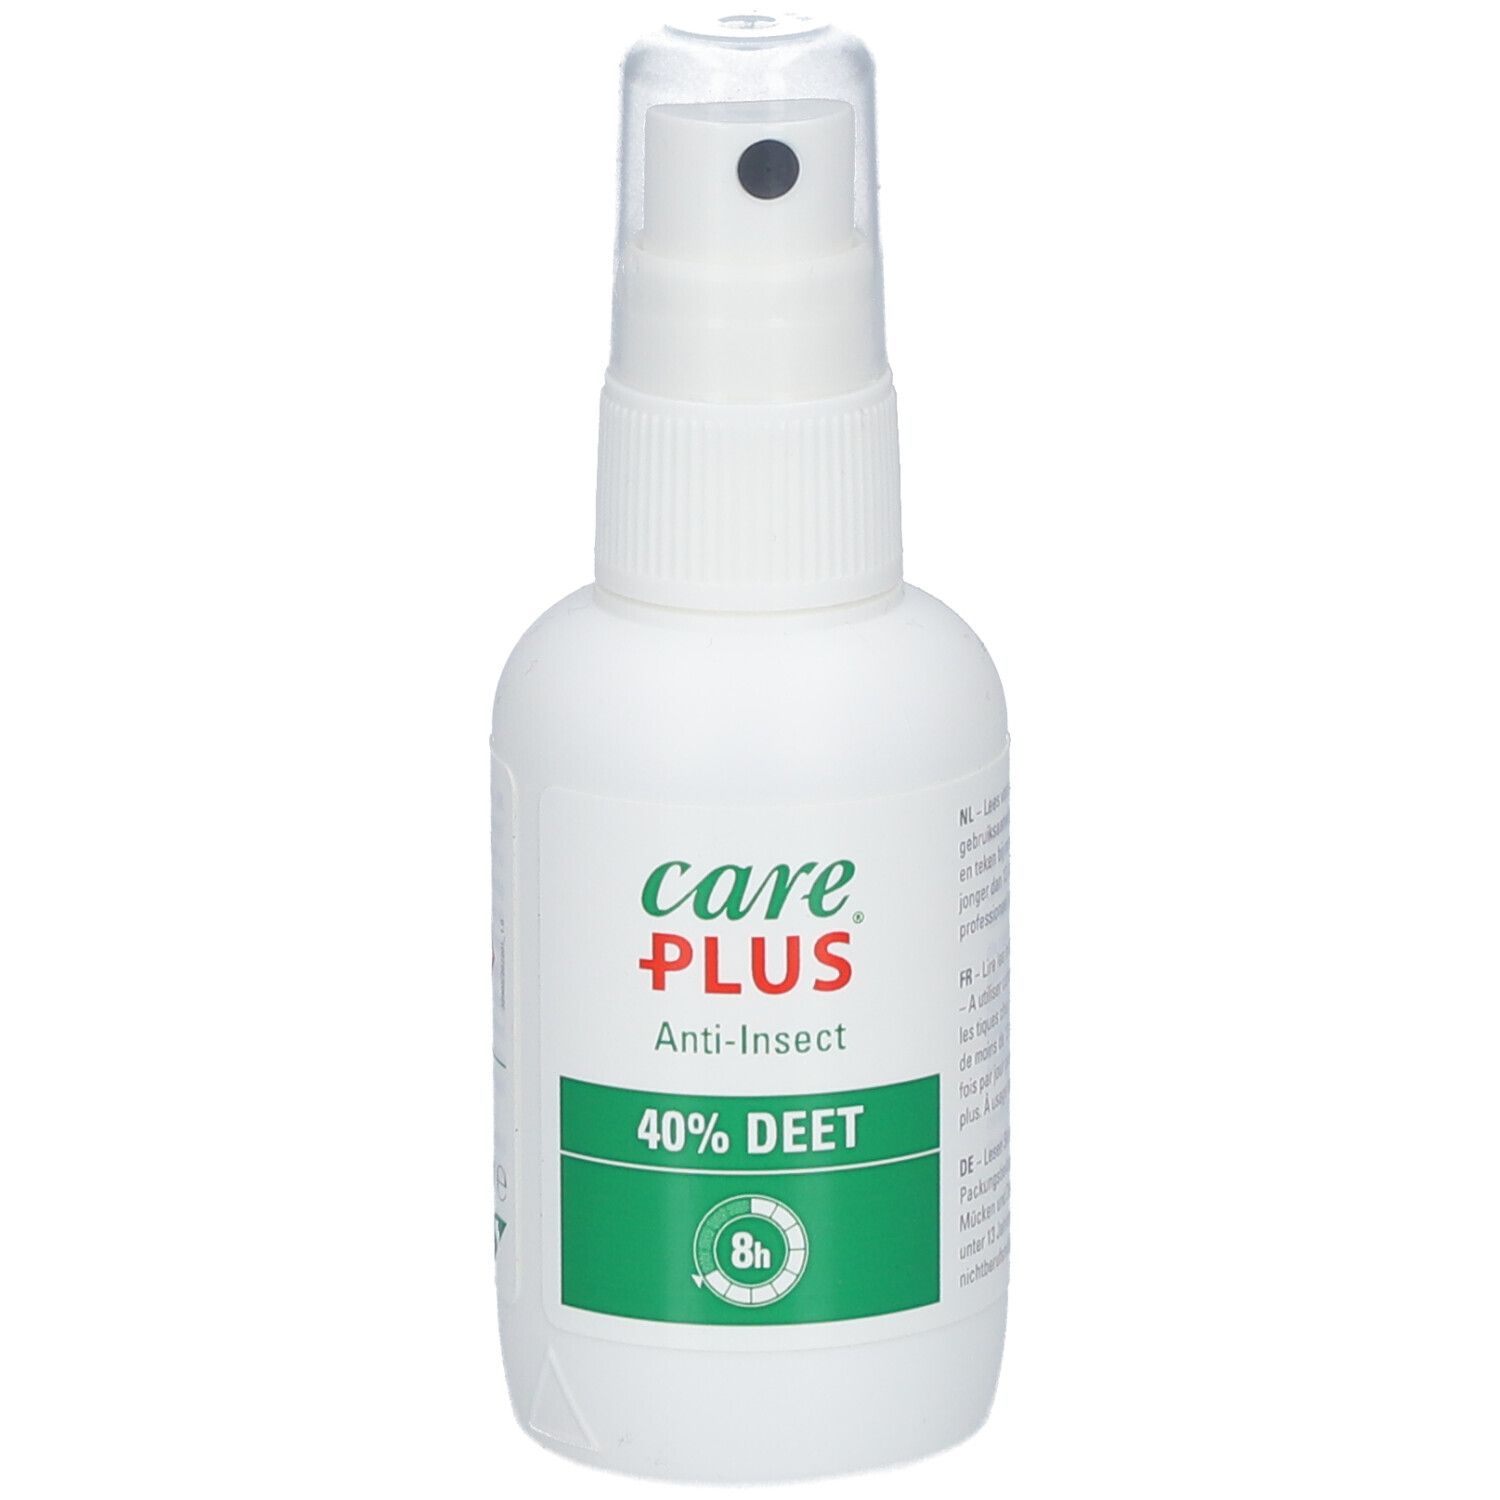 Care Plus Anti-Insect spray 40 %